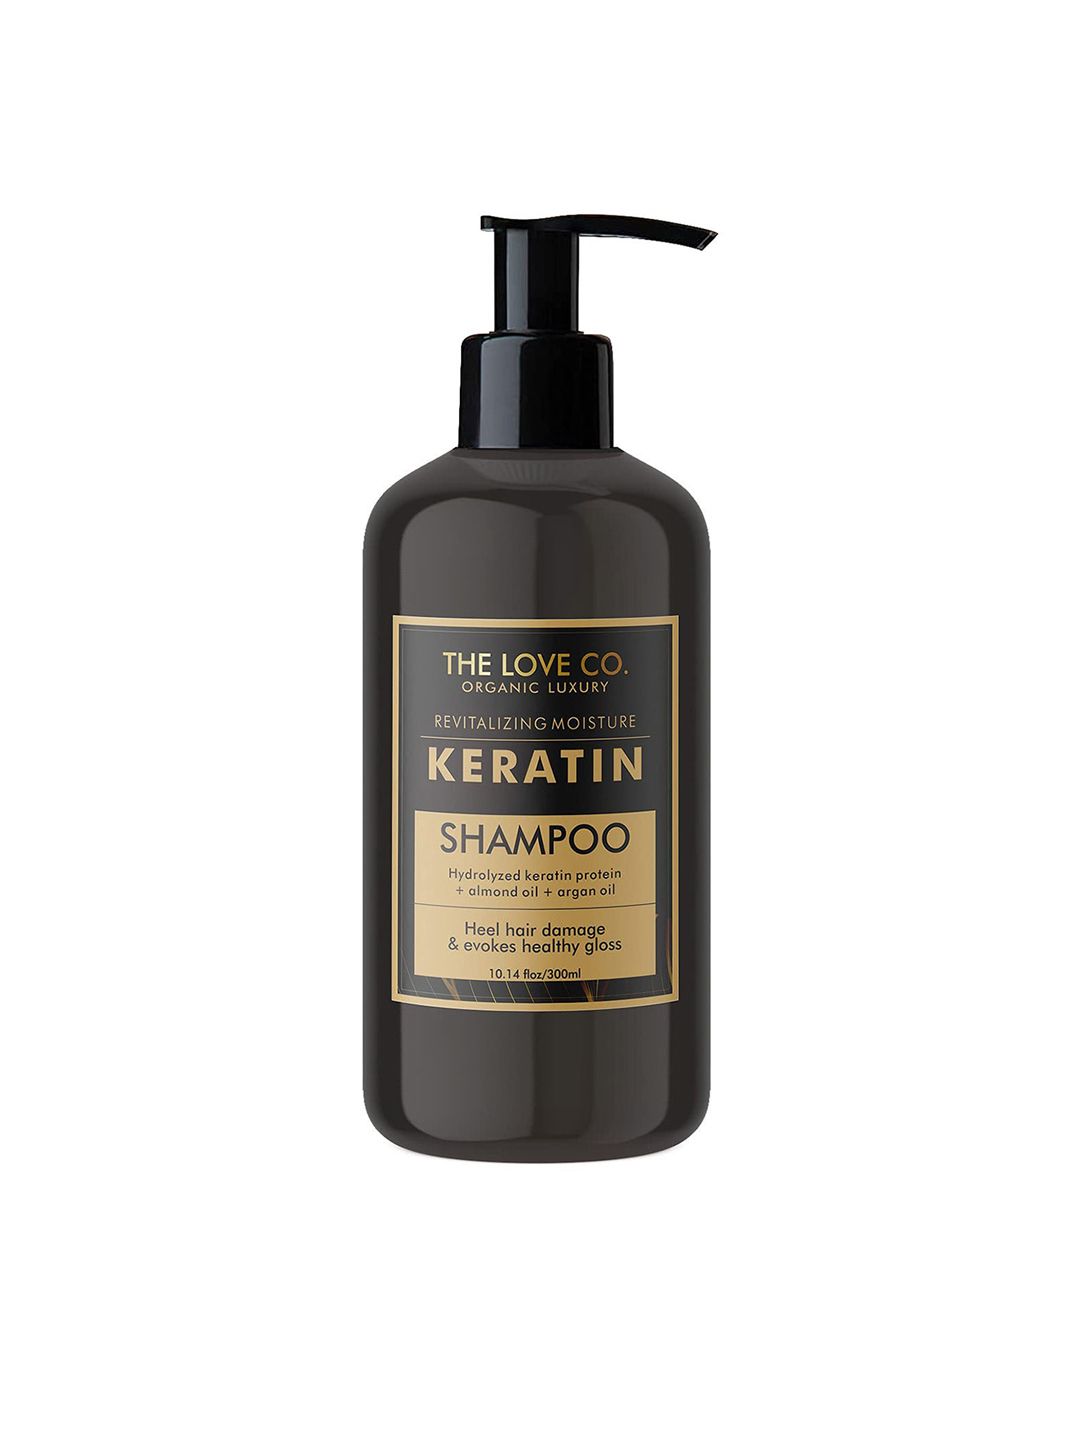 THE LOVE CO. Keratin Protein Shampoo For Hair Growth & Damaged Hair 300ml Price in India